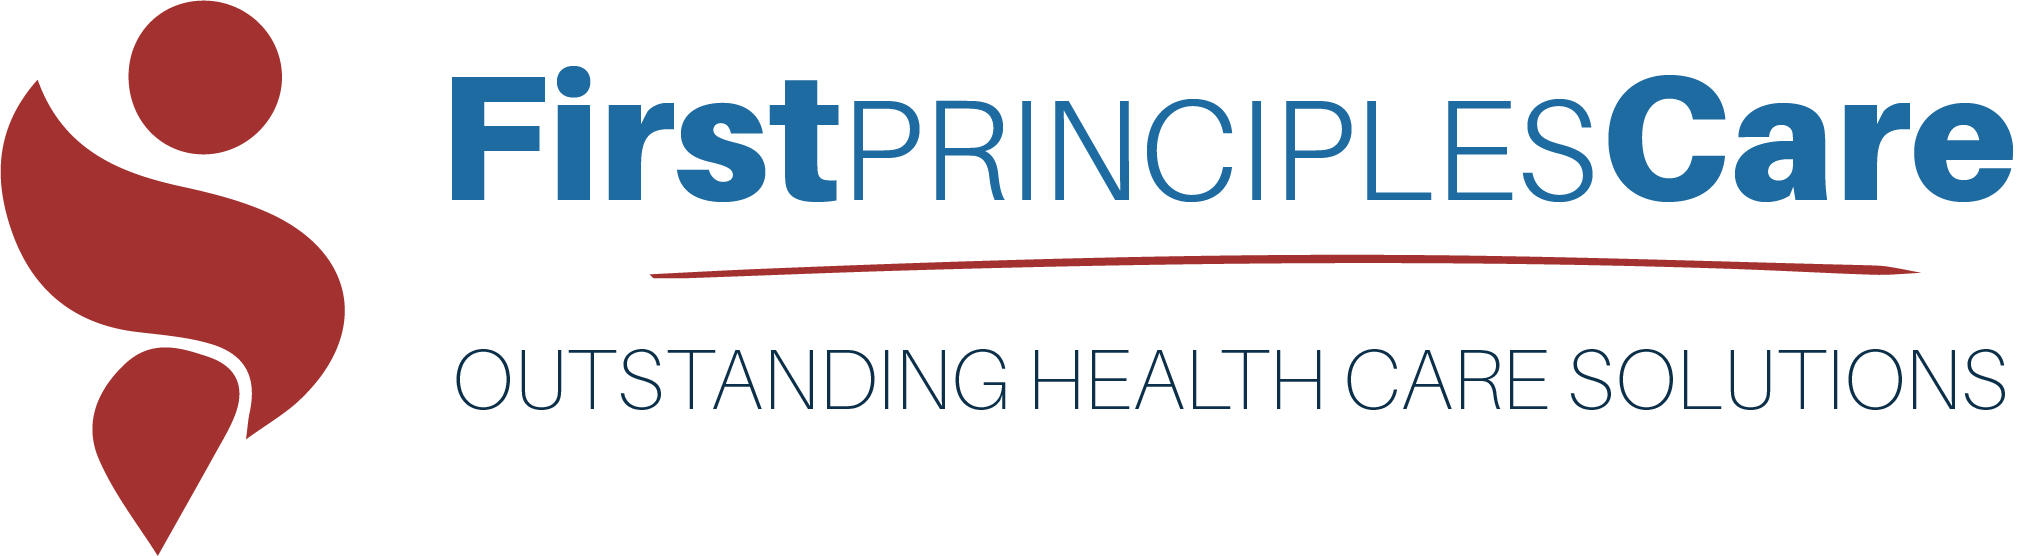 First Principles Care